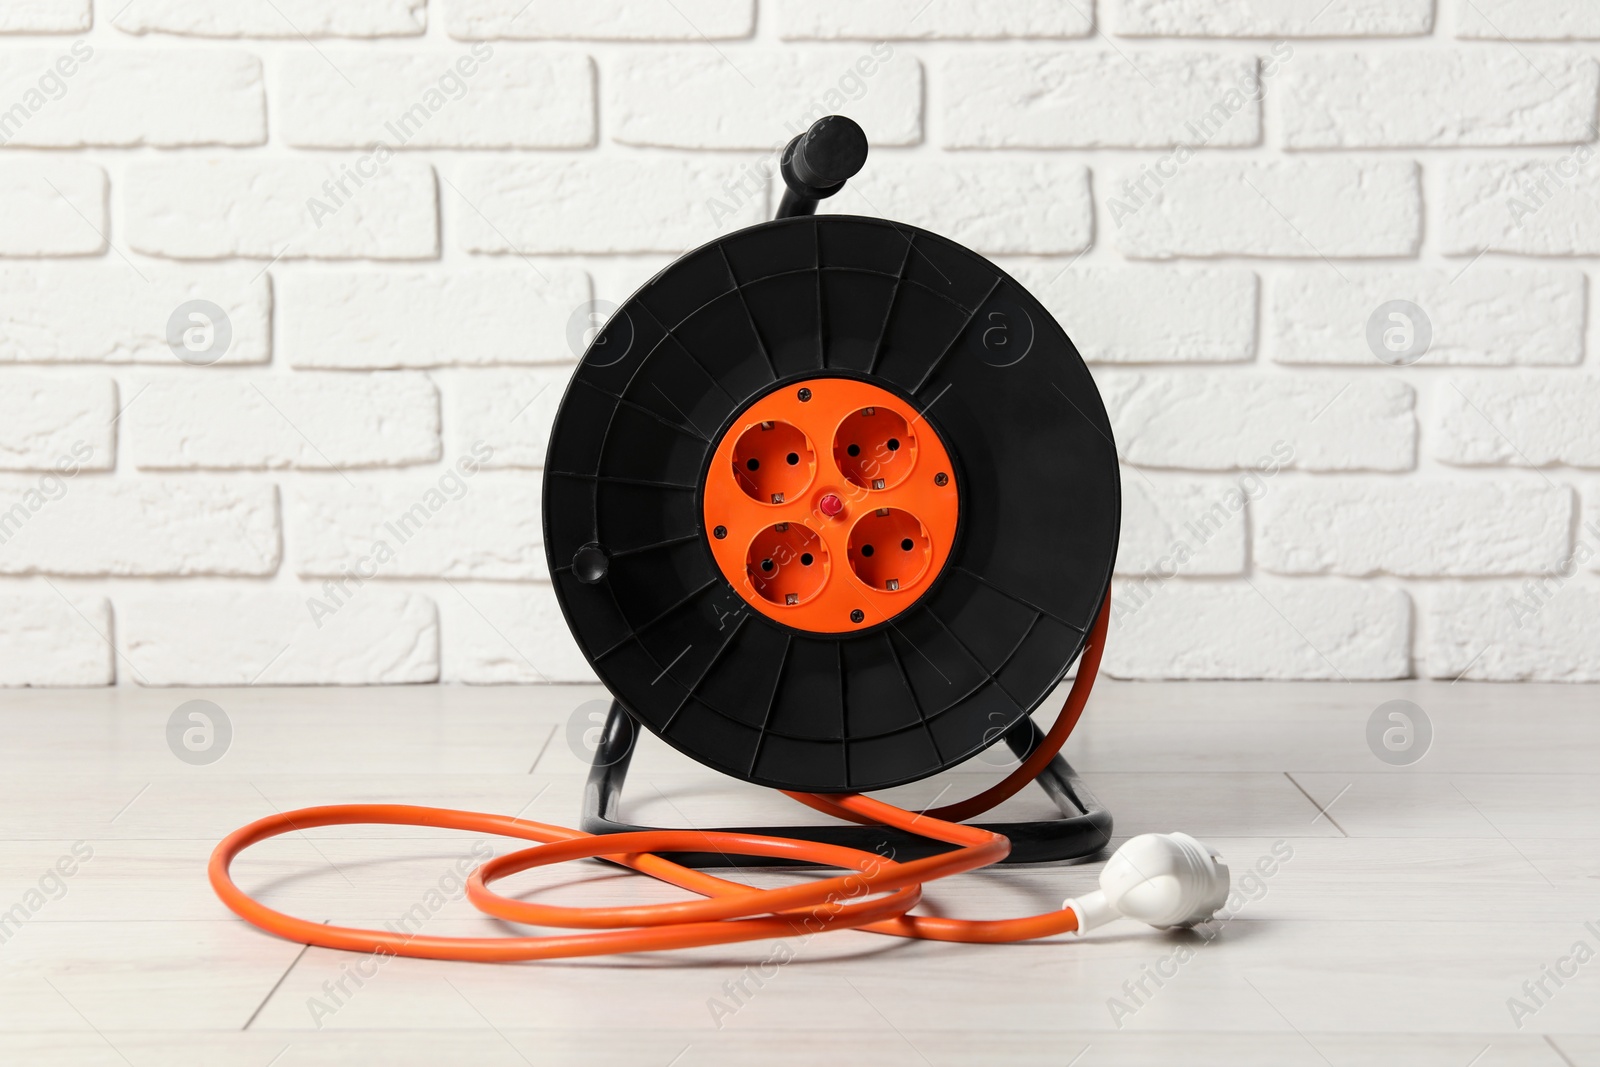 Photo of Extension cord reel on floor near white brick wall. Electrician's equipment